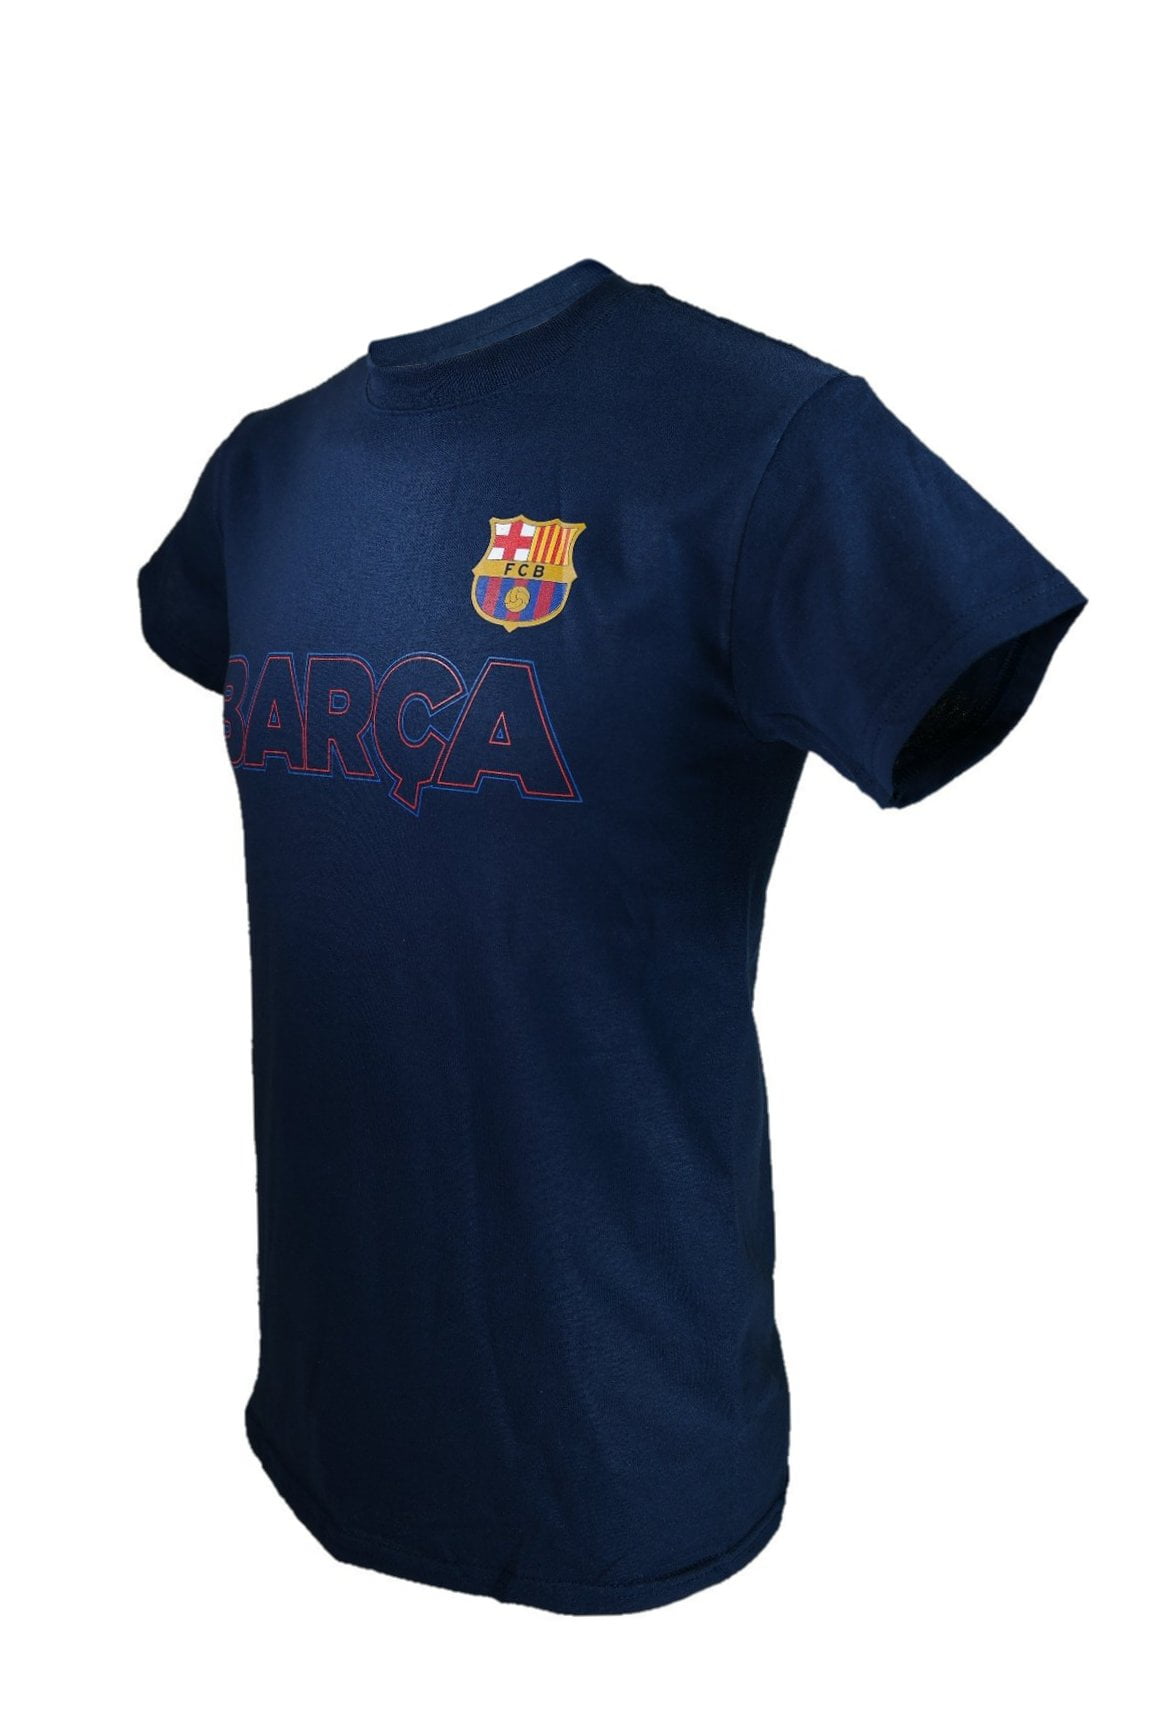 Icon Sports Men FC Barcelona Officially Licensed Soccer T-Shirt Cotton Tee 06 